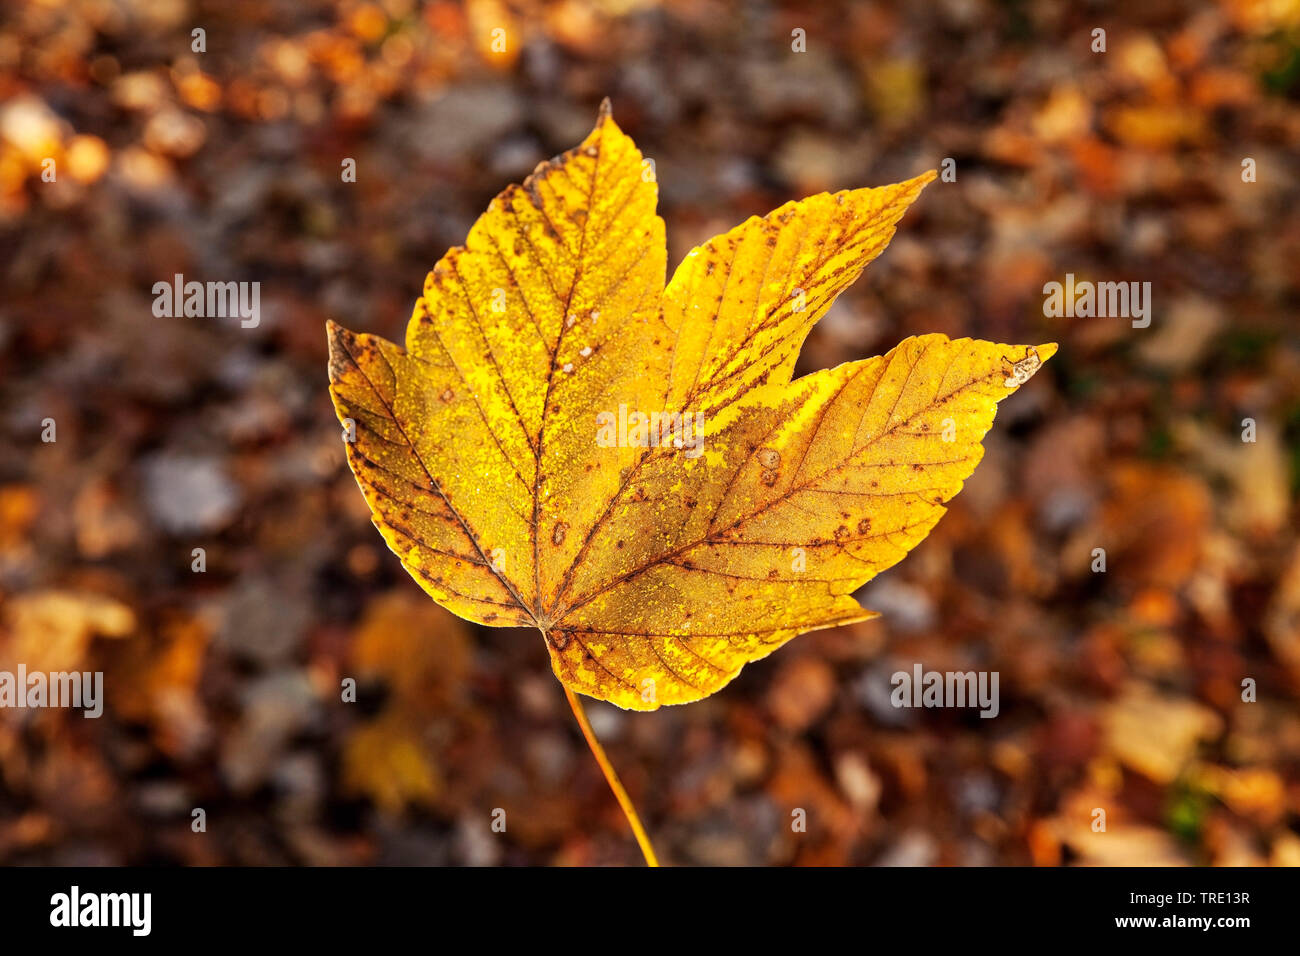 sycamore maple, great maple (Acer pseudoplatanus), autumn leaf in backlight, Germany, North Rhine-Westphalia Stock Photo